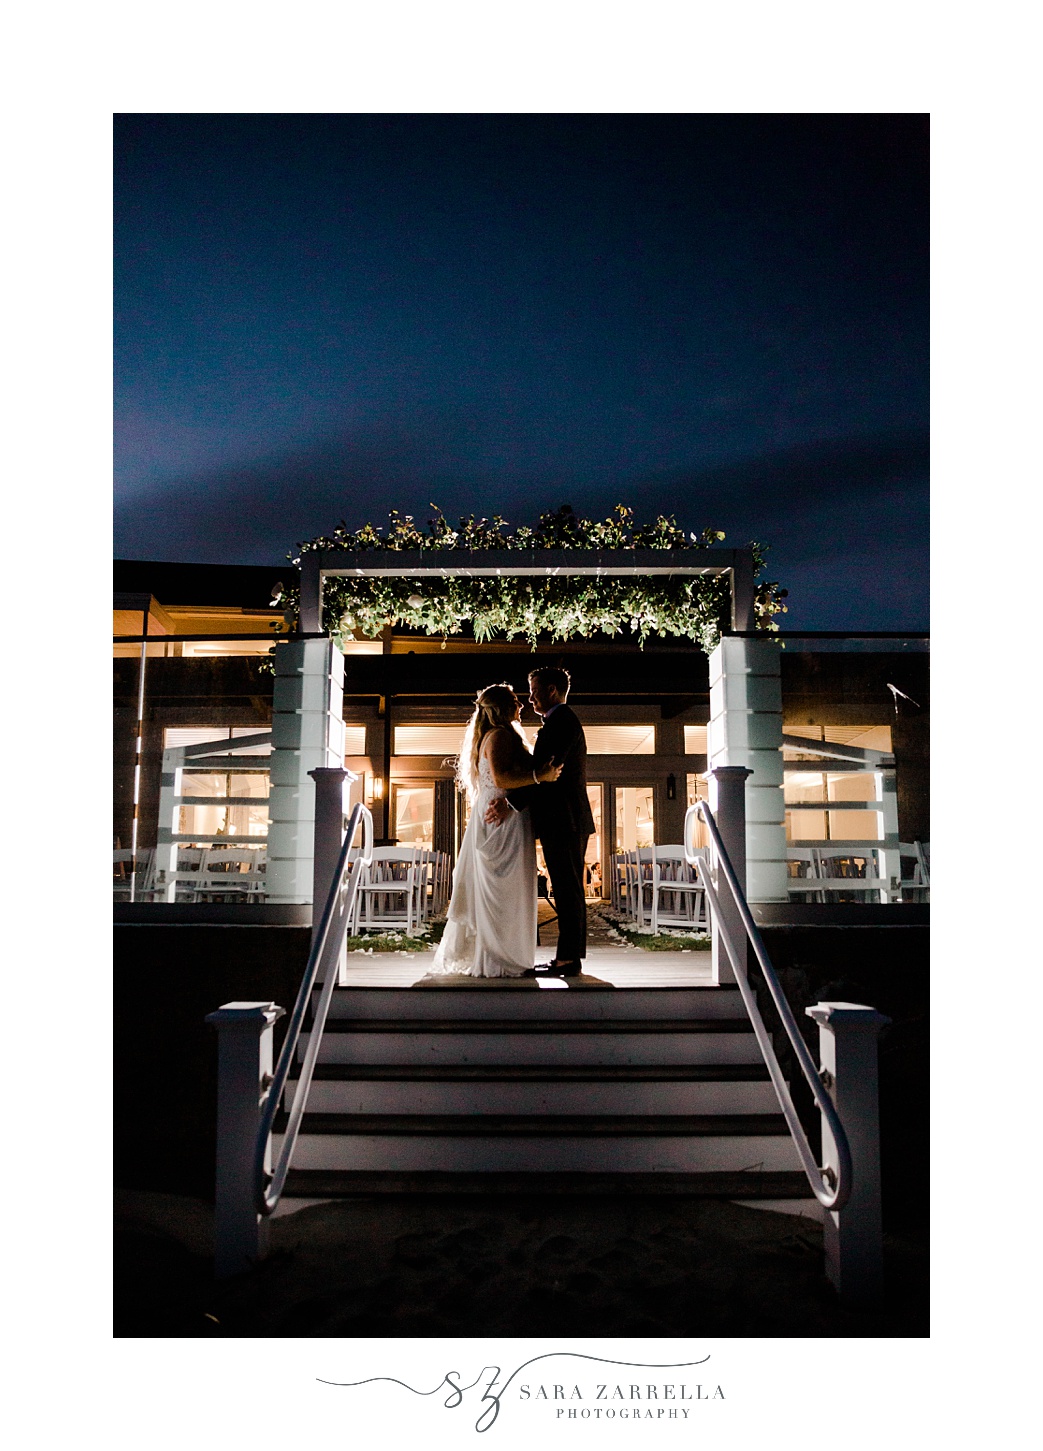 bride and groom pose under arbor at Newport Beach House at night